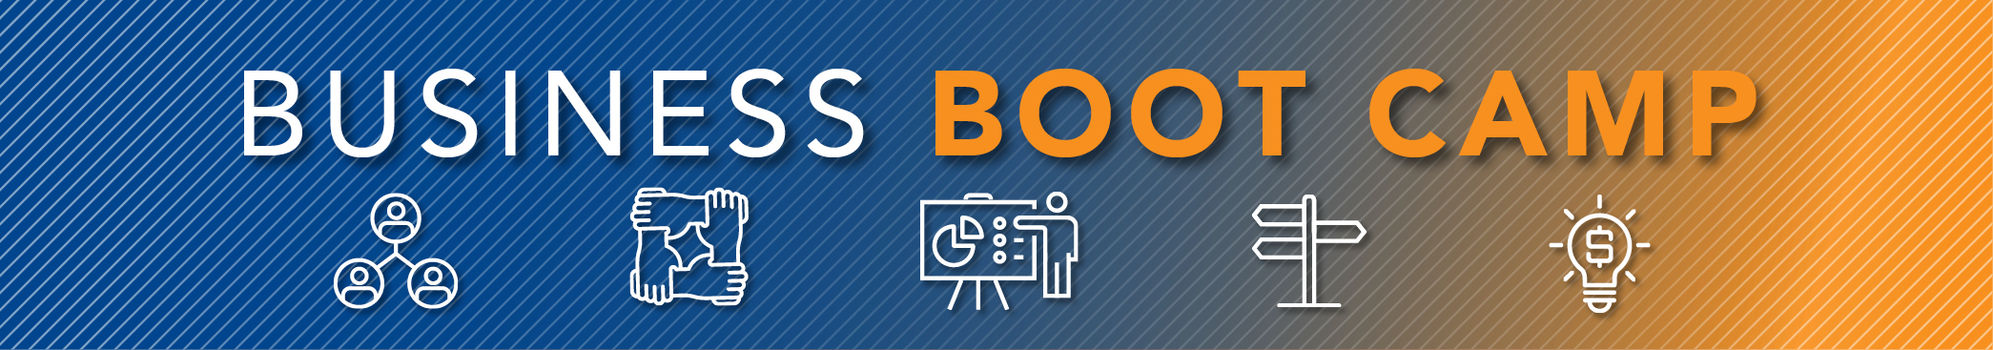 Decorative blue and orange image with text reading "Business Boot Camp" and icons indicating networking, teamwork, learning, pathfinding, and ideation